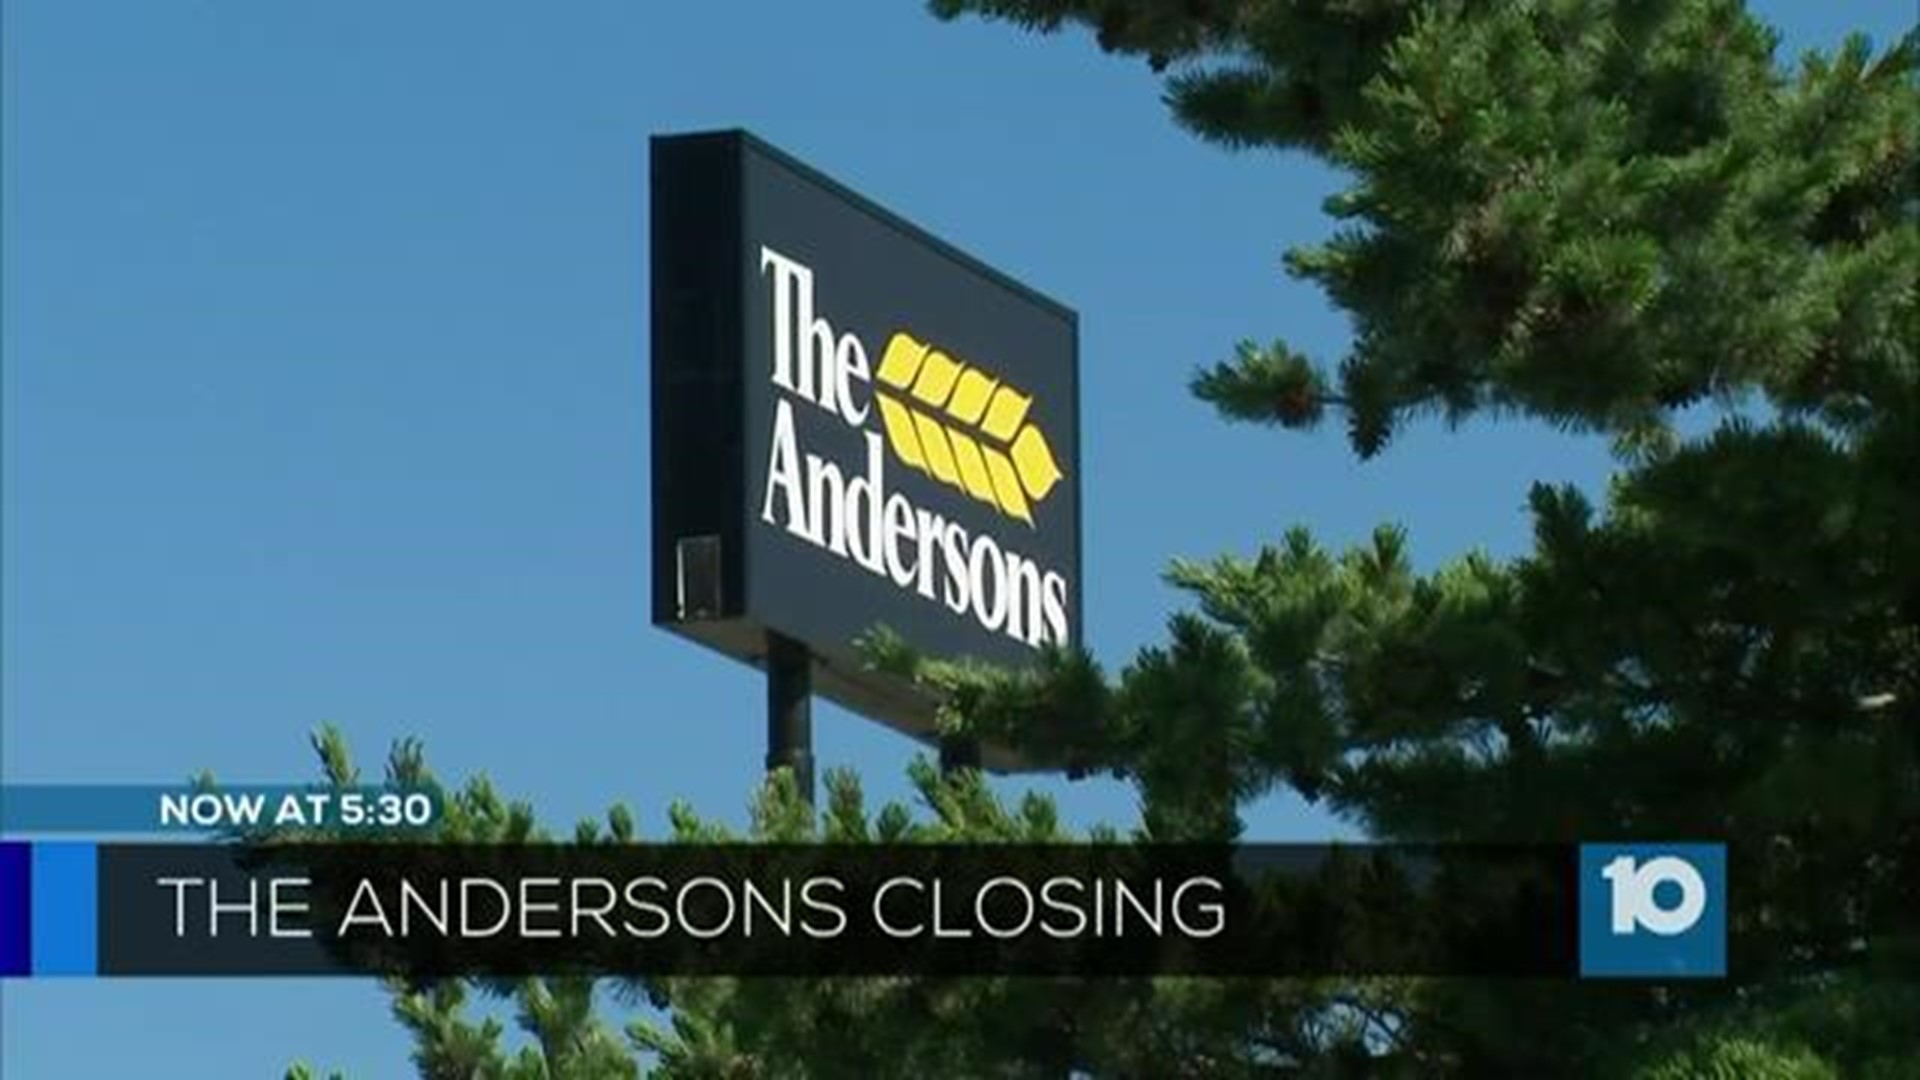 Saying goodbye to Andersons